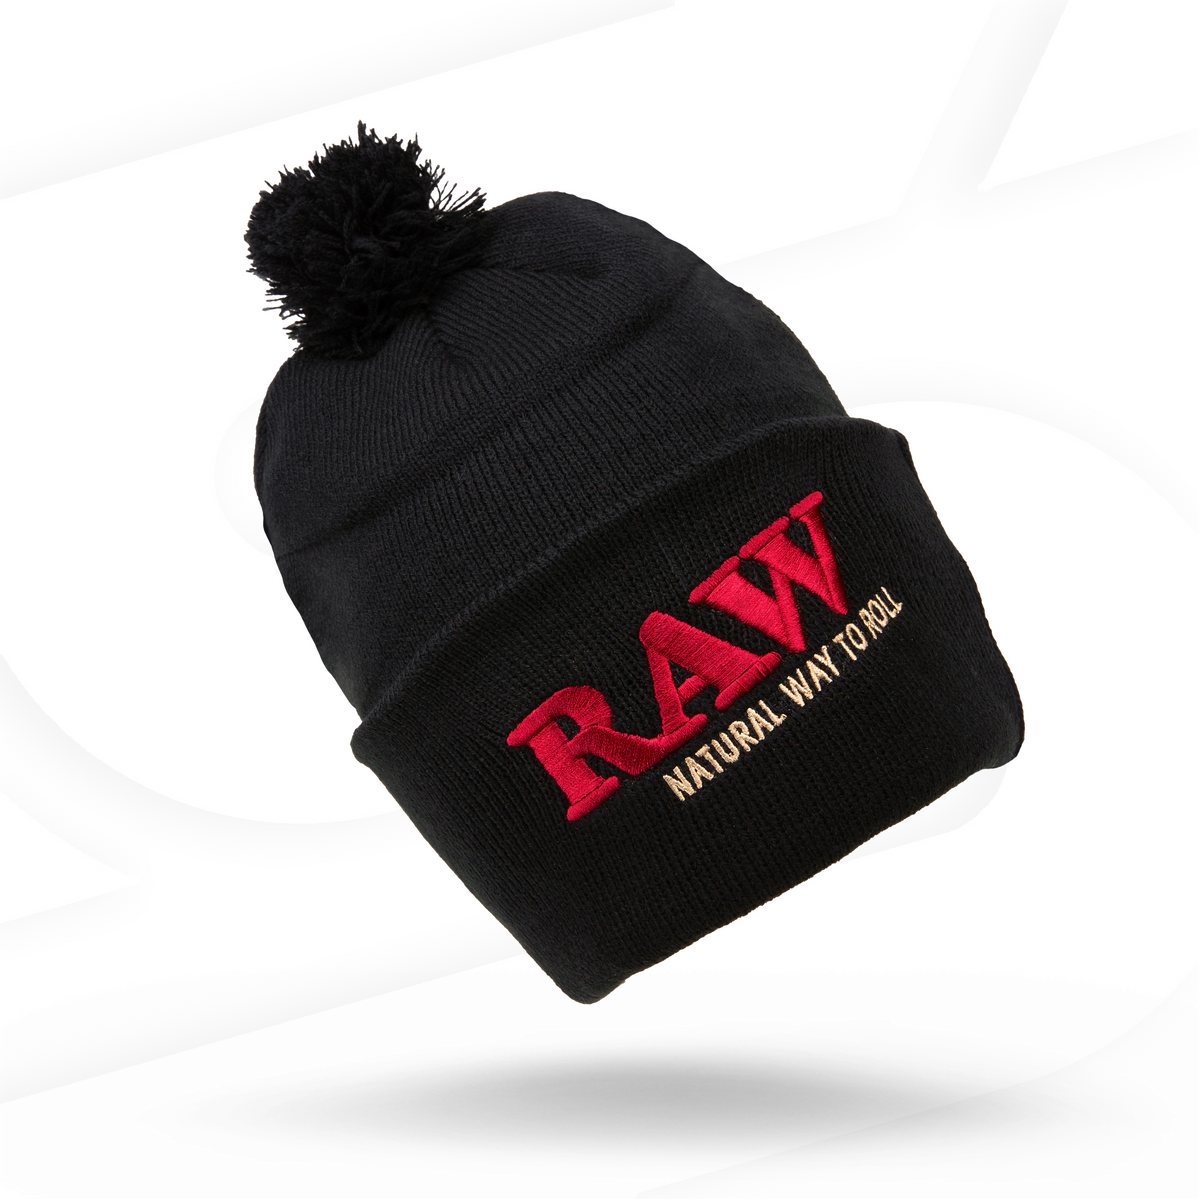 RAW Knit Beanie Hat | Black Clothing Accessories RAWU-APRP-0005 esd-official